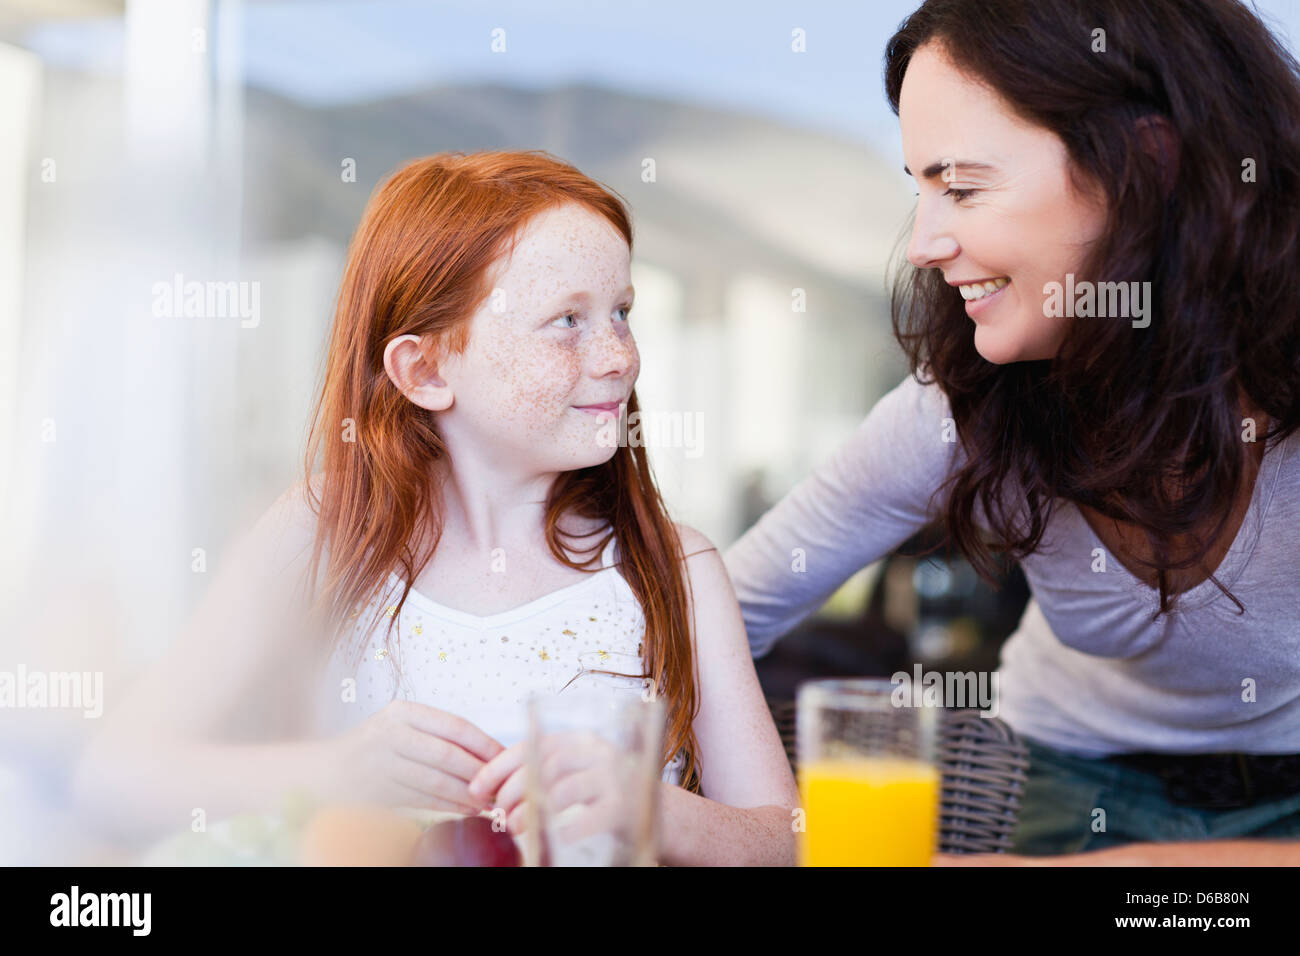 Mother smiling at daughter at breakfast Stock Photo